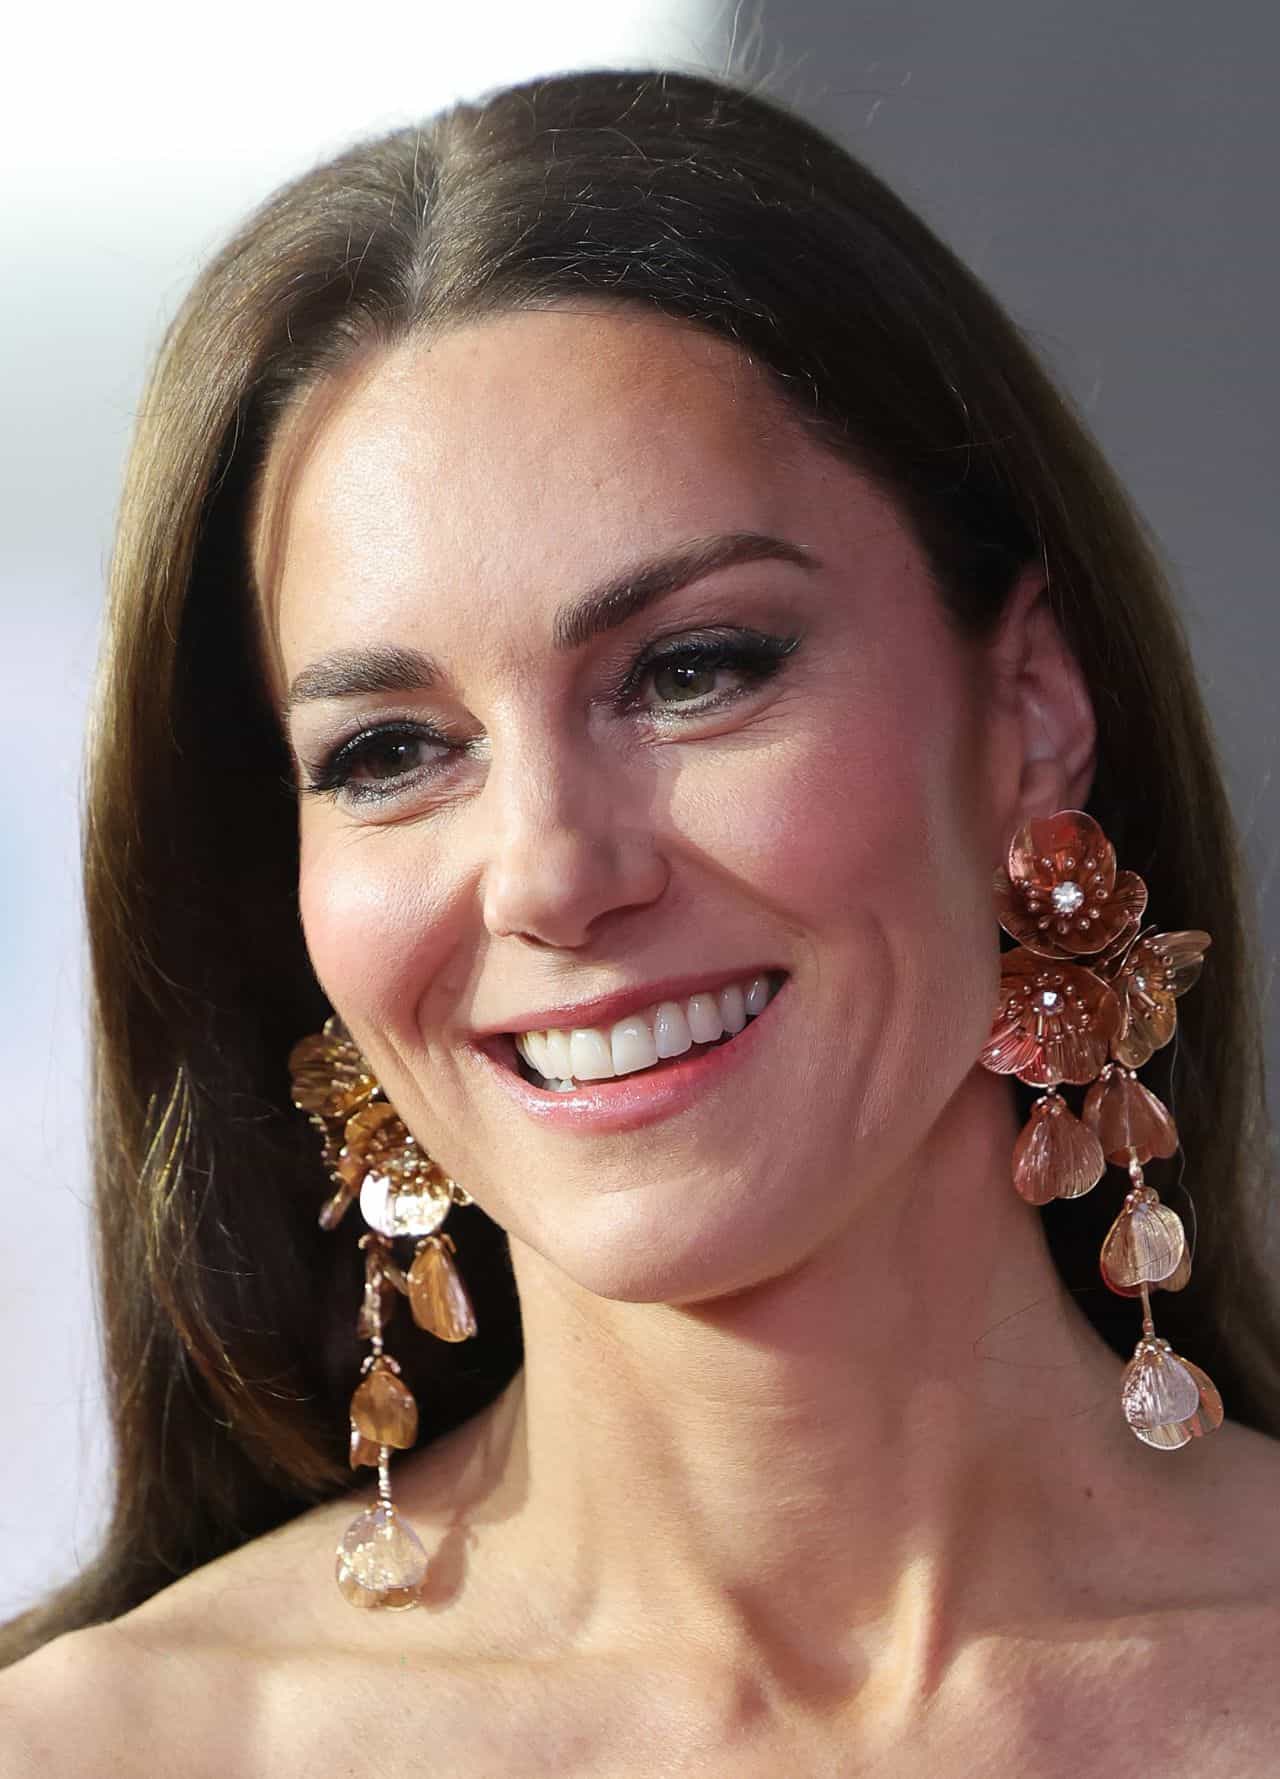 Kate Middleton Dazzles at the BAFTAs in a White Gown and Opera Gloves